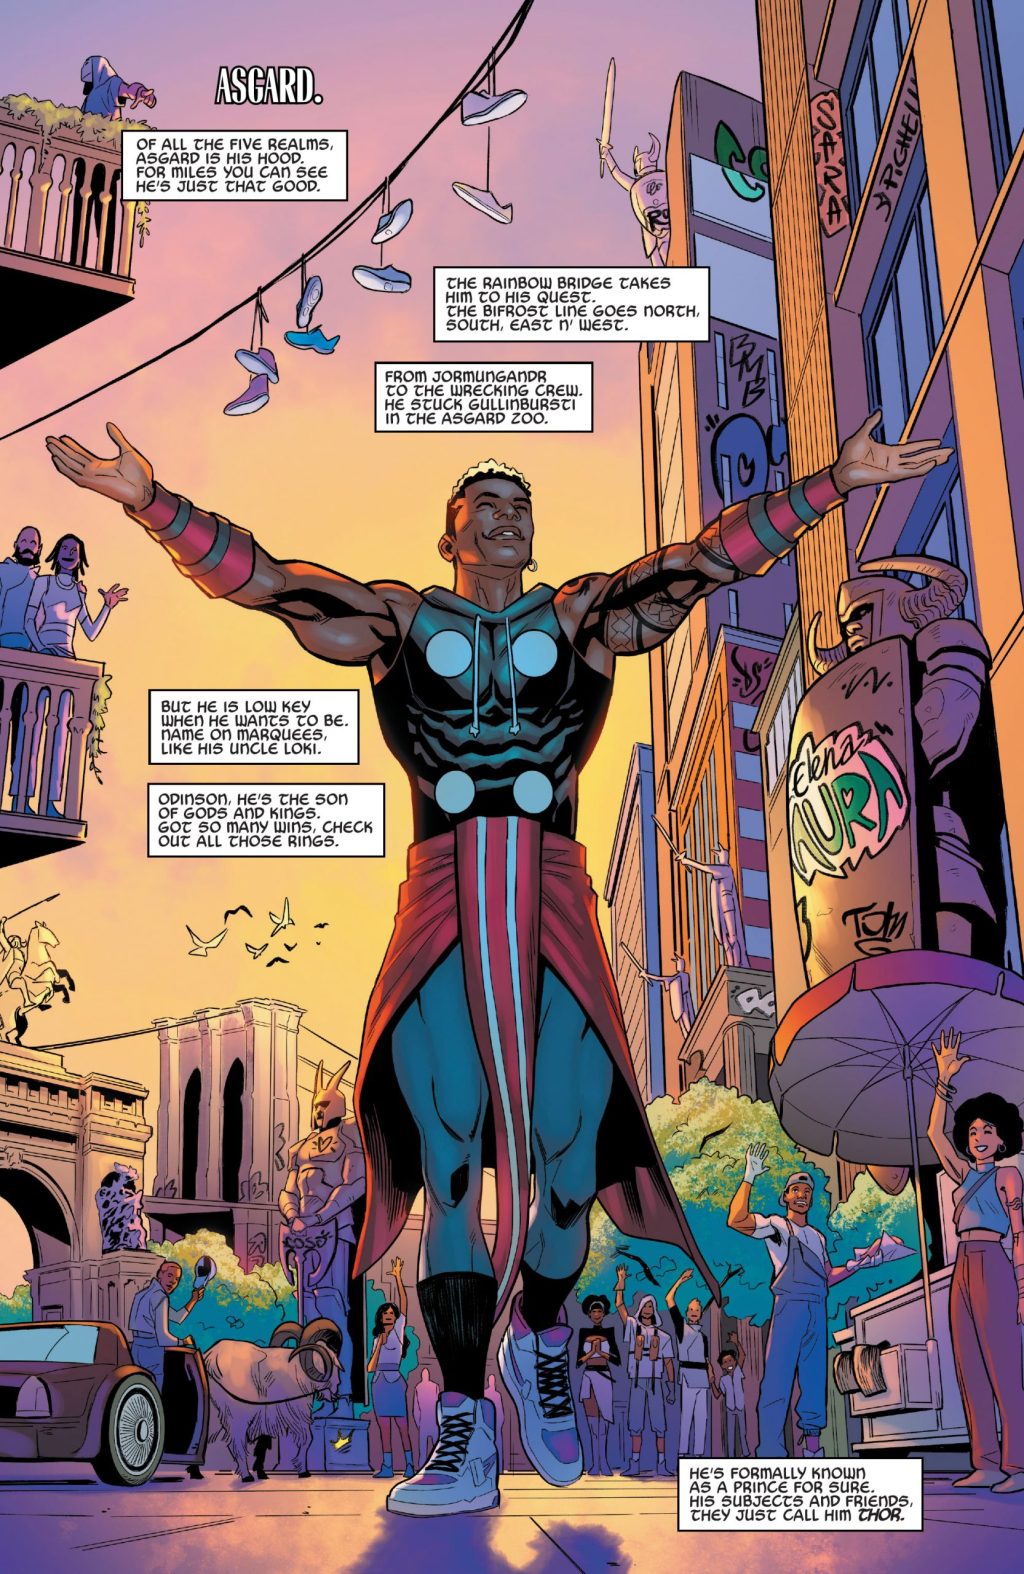 The God of Thunder takes to the streets of Asgard in What If... Miles Morales Vol. 1 #4 "What if...Mile Morales became Thor?" (2022), Marvel Comics. Words by Yehudi Mercado, art by Luigi Zagaria and Chris Sotomayor.